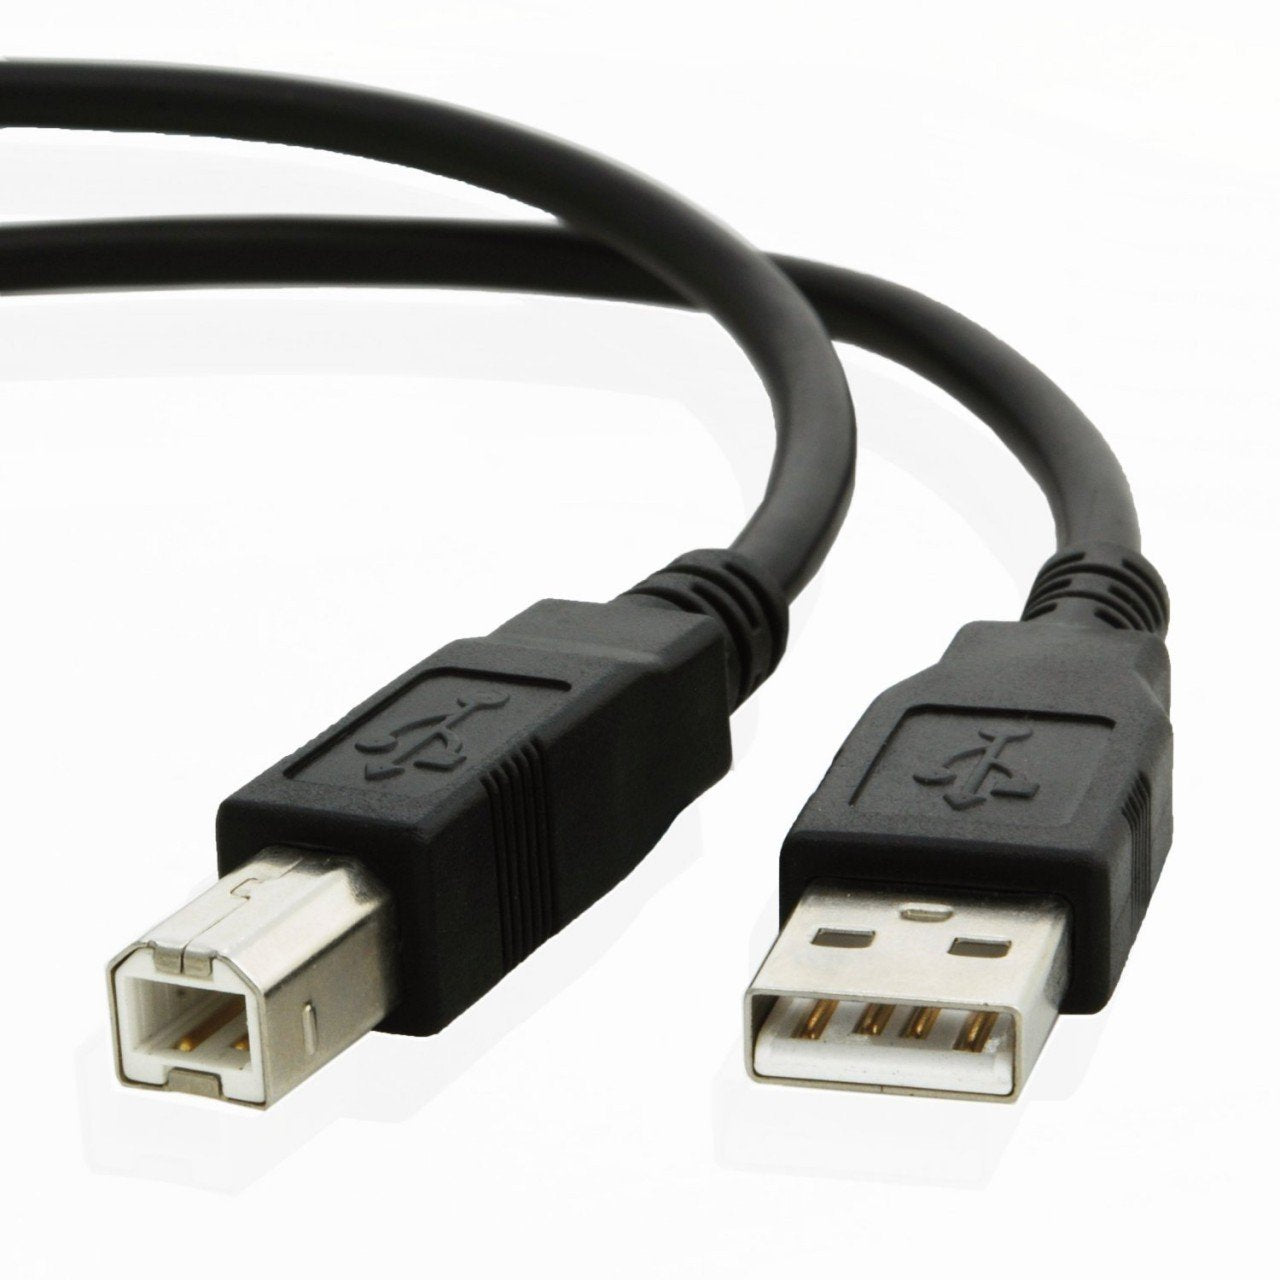 USB cable for Hp PAGEWIDE ENTERPRISE 586dn